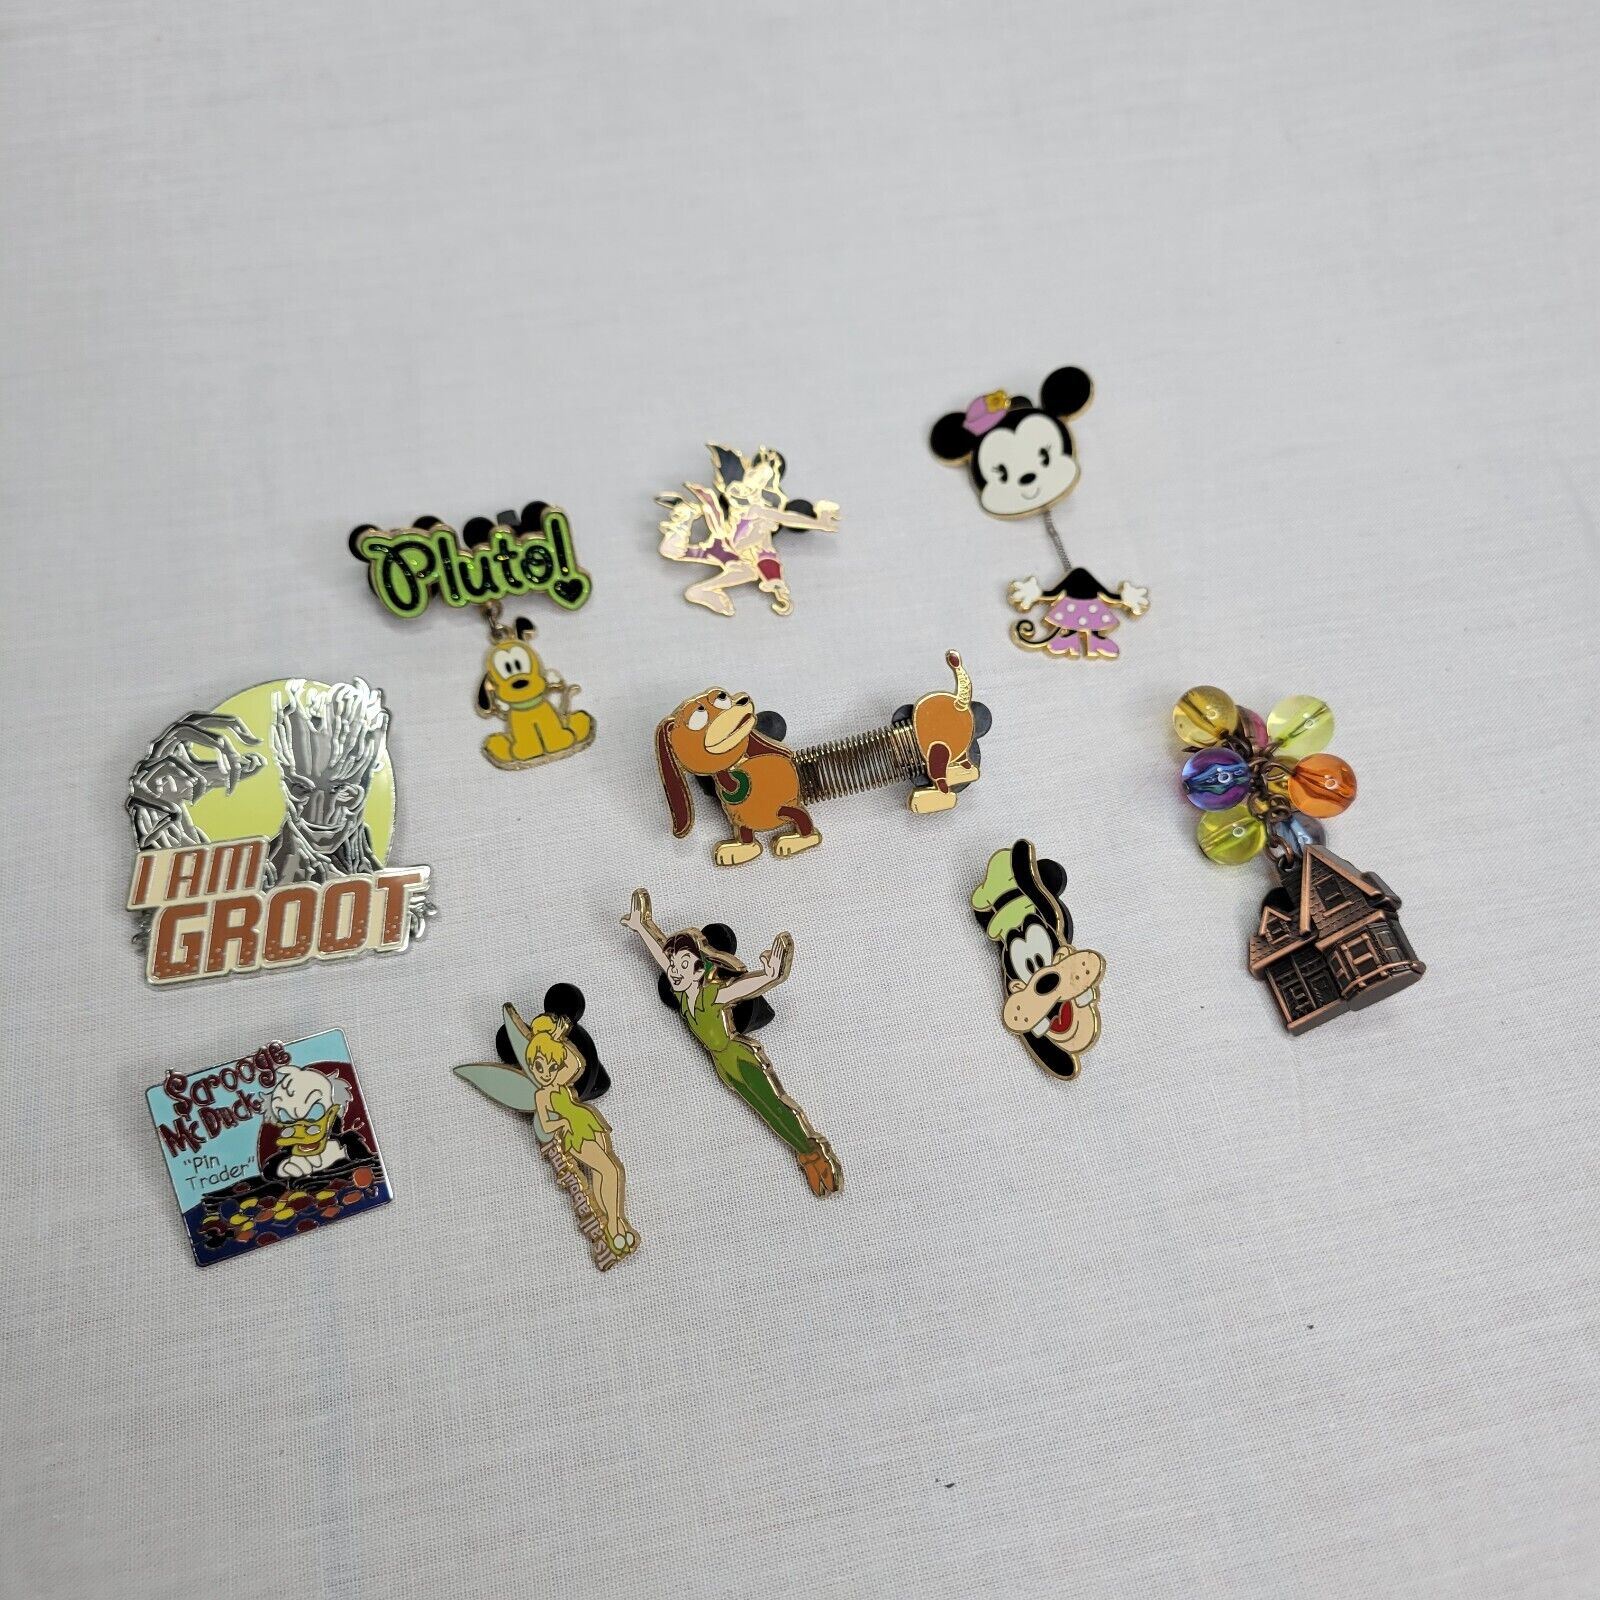 10 Piece Lot Of Disney Trading Pins Marvel Pixar Mixed Themed Authentic Pins